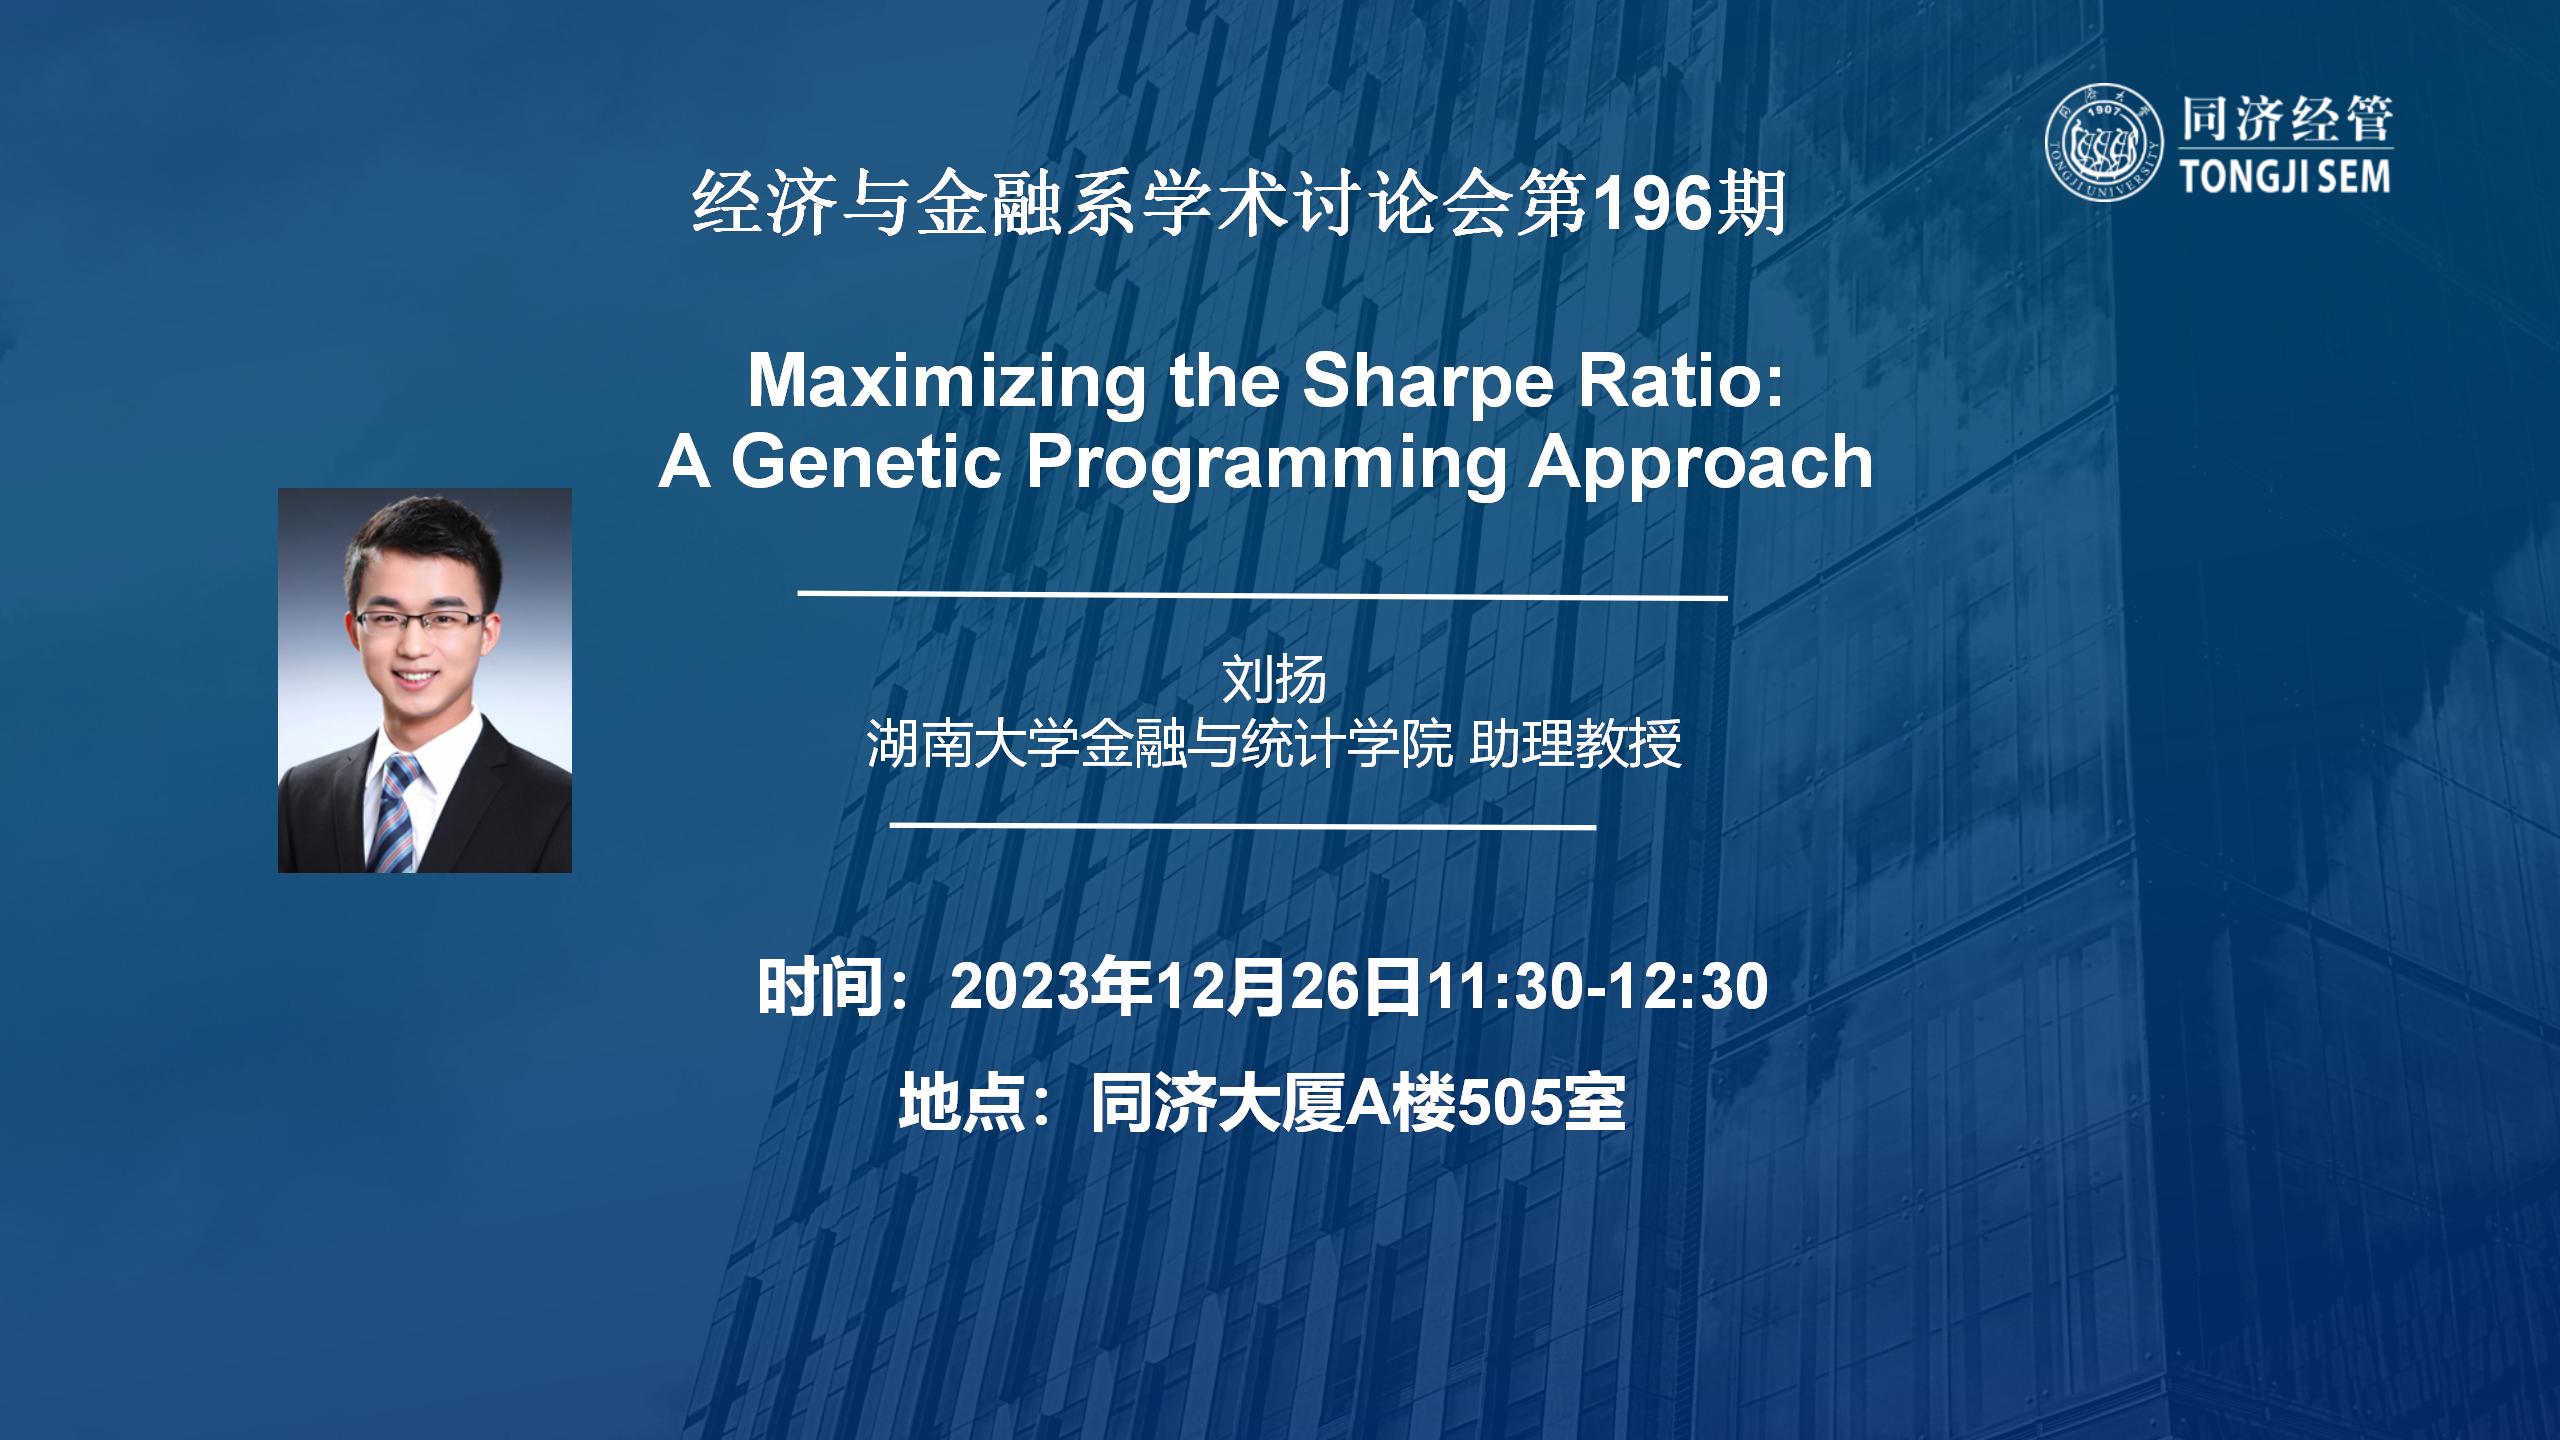 Maximizing the Sharpe Ratio: A Genetic Programming Approach